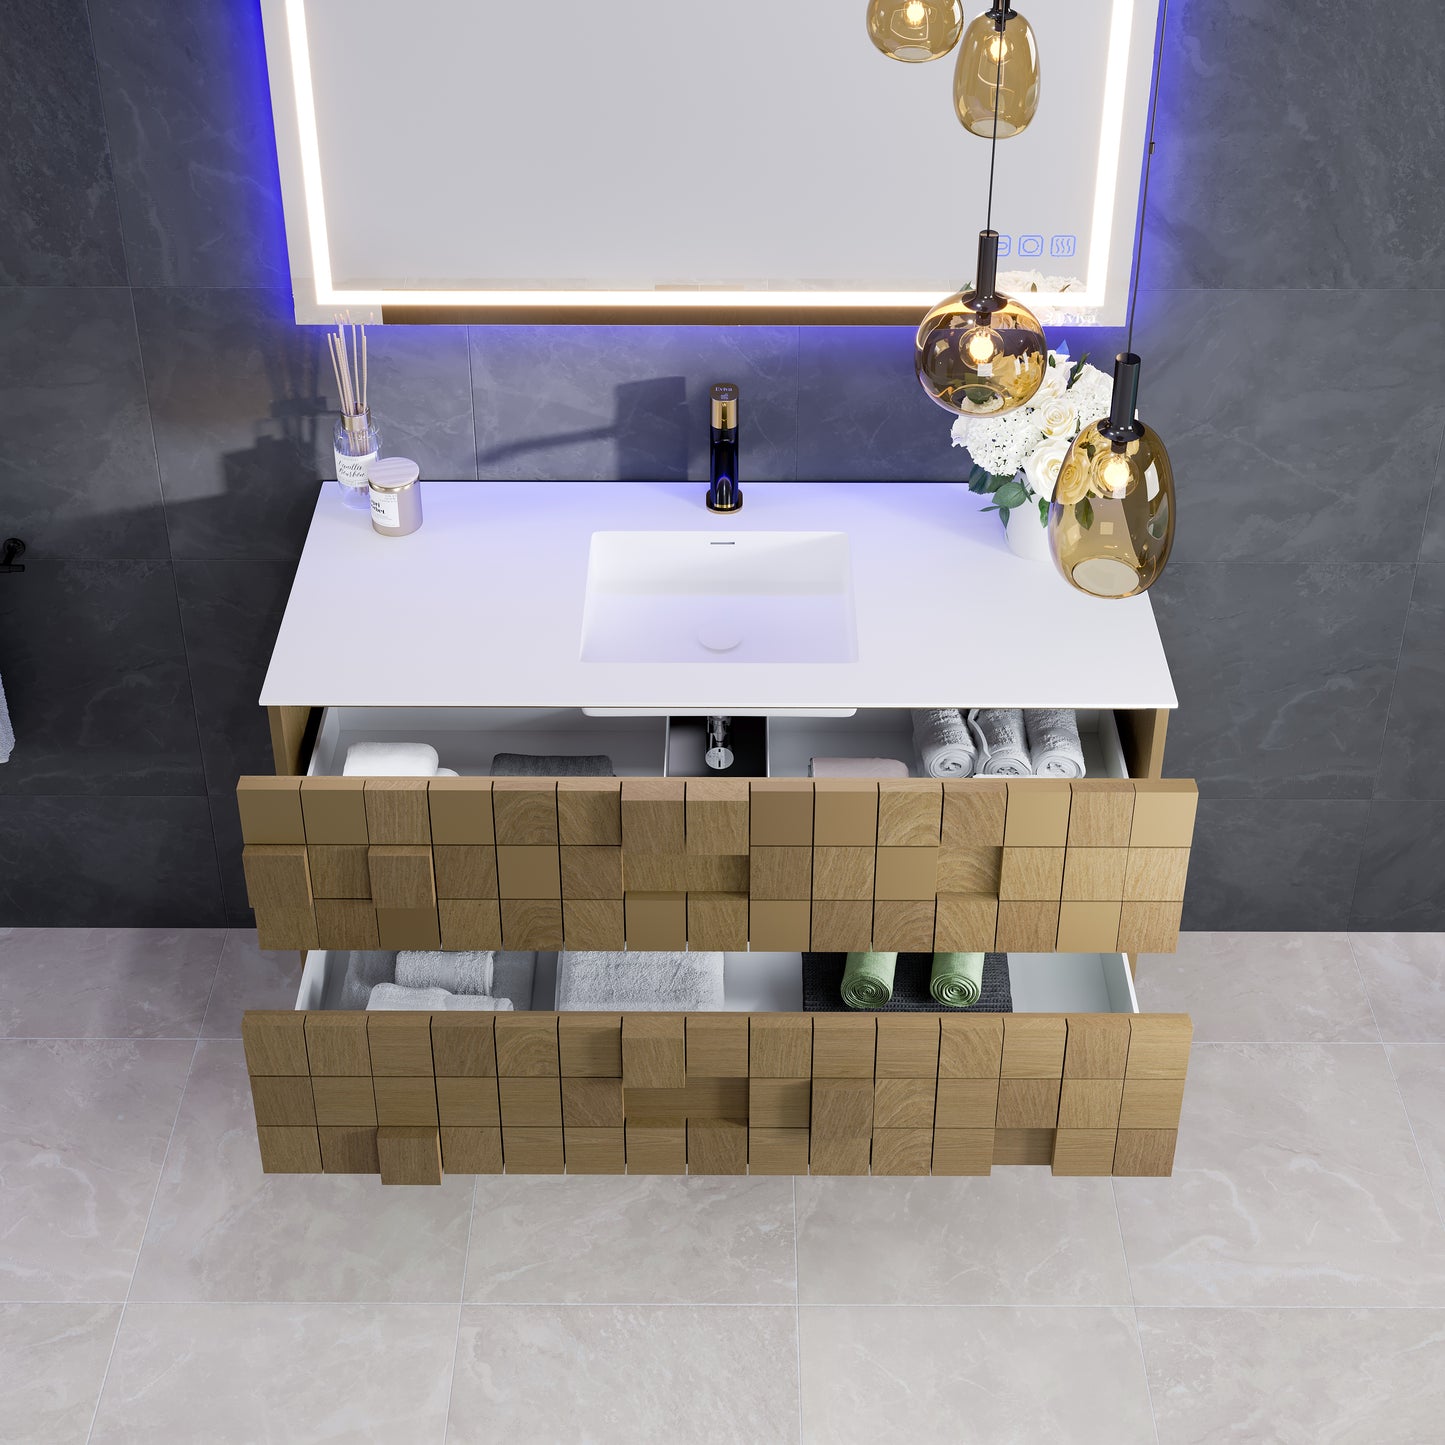 Mosaic 48"W x 20"D Natural Oak Bathroom Vanity with Solid Surface Countertop and Integrated Sink